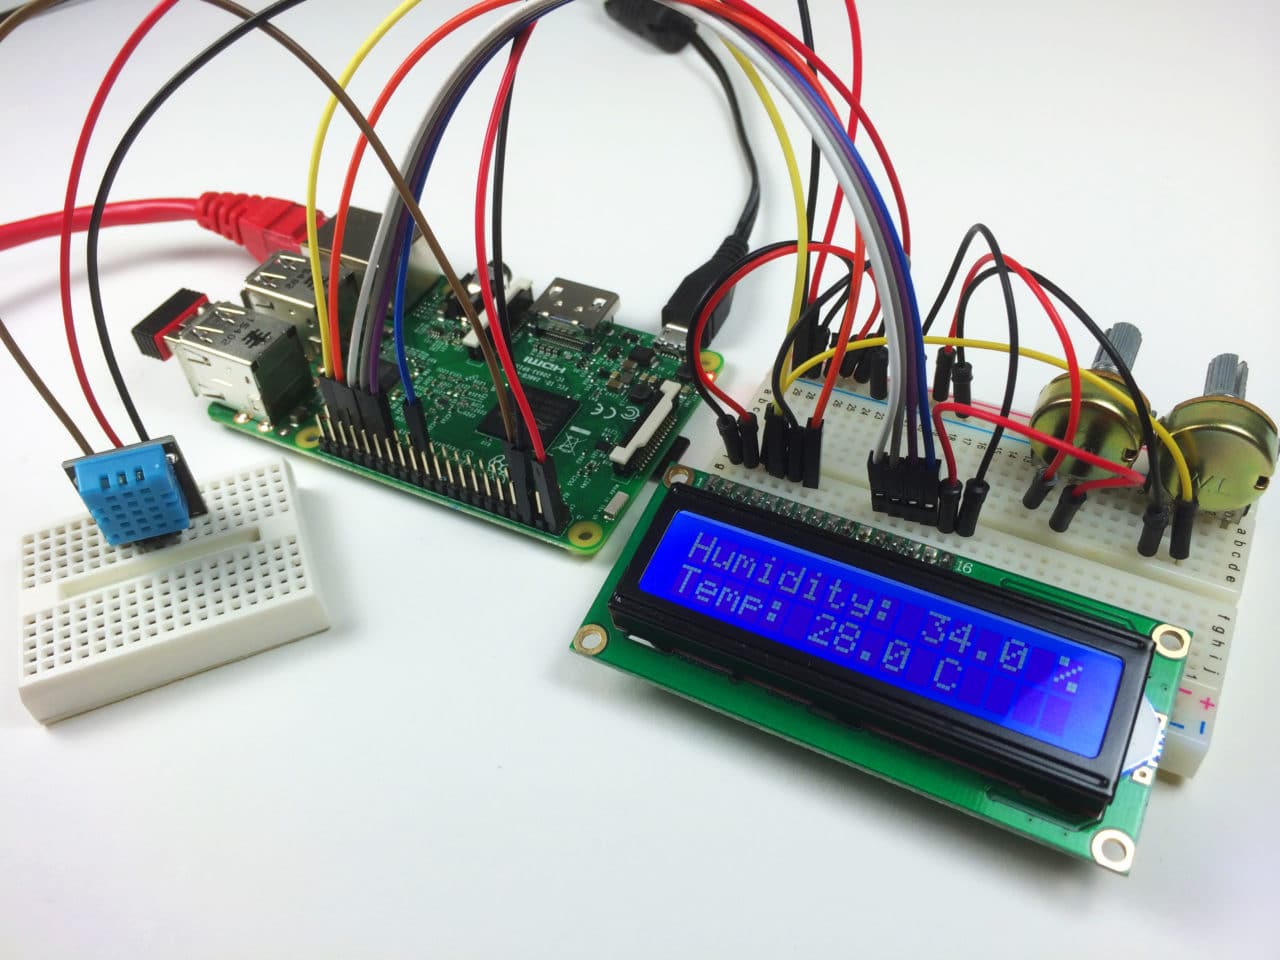 https://www.circuitbasics.com/wp-content/uploads/2015/12/How-to-Set-Up-the-DHT11-Humidity-Sensor-on-the-Raspberry-Pi-DHT11-Output-to-LCD.jpg